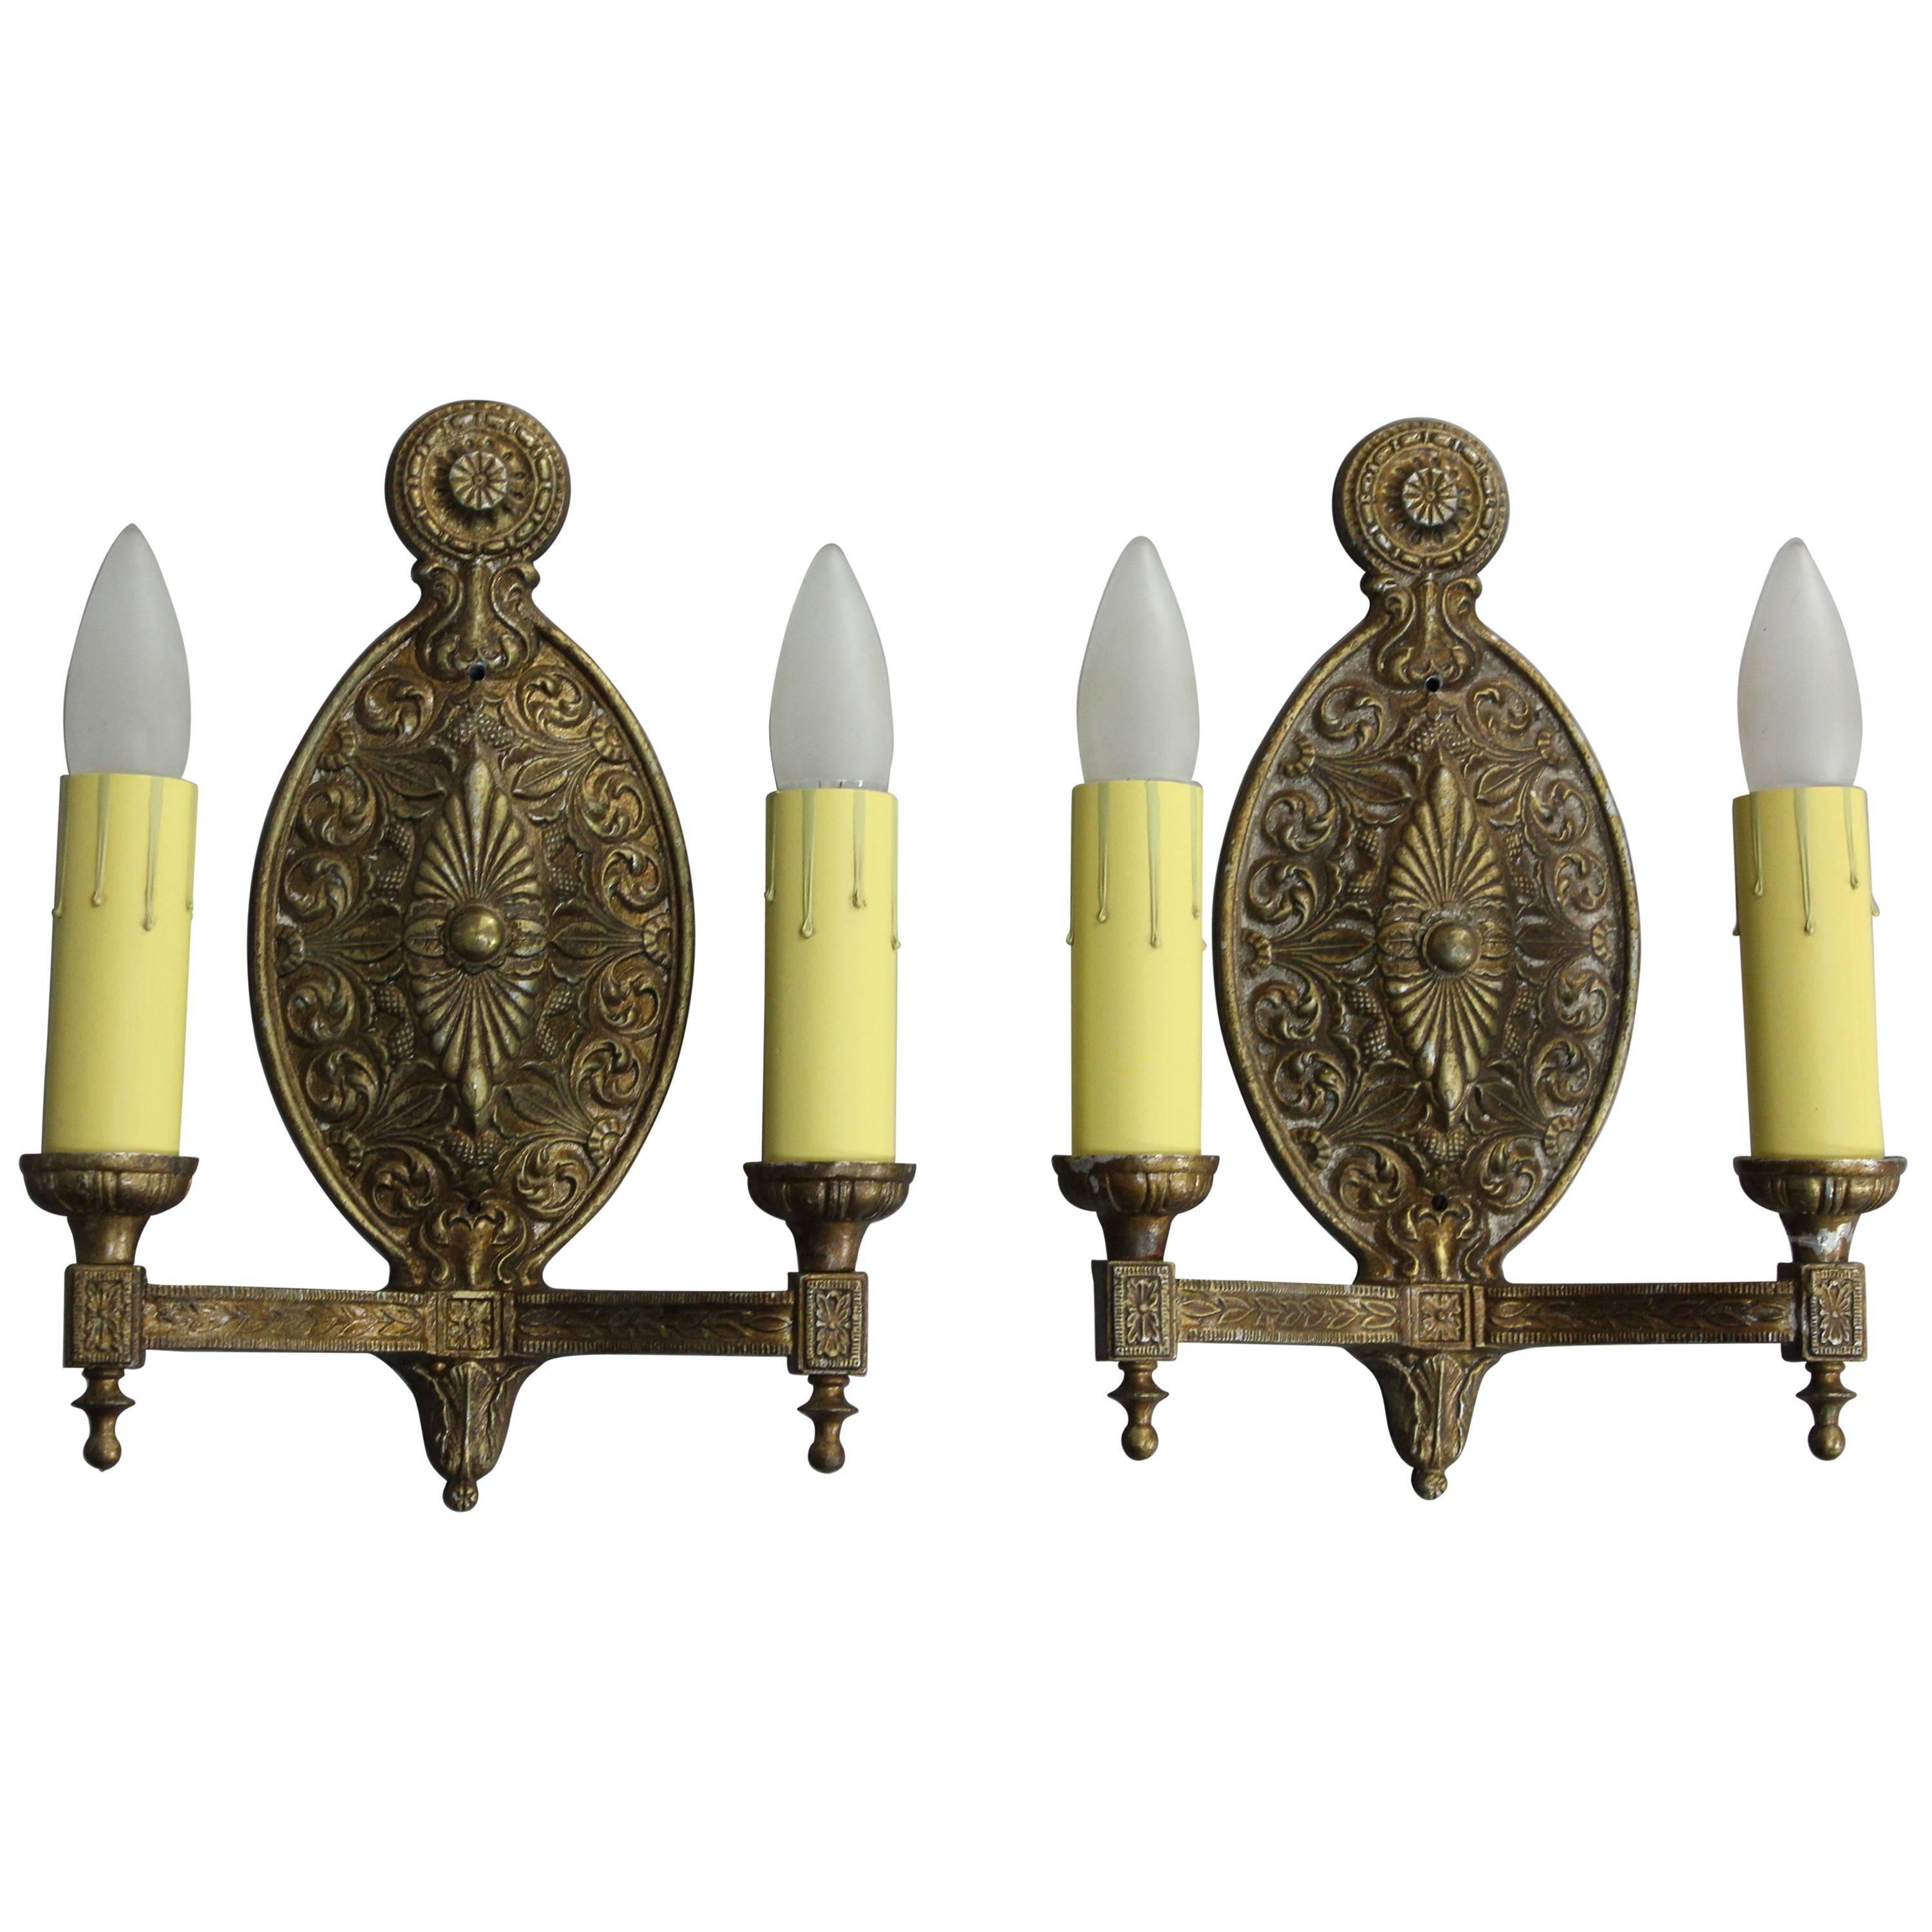 Pair of 1920s Double Light Gold Tone Sconces For Sale